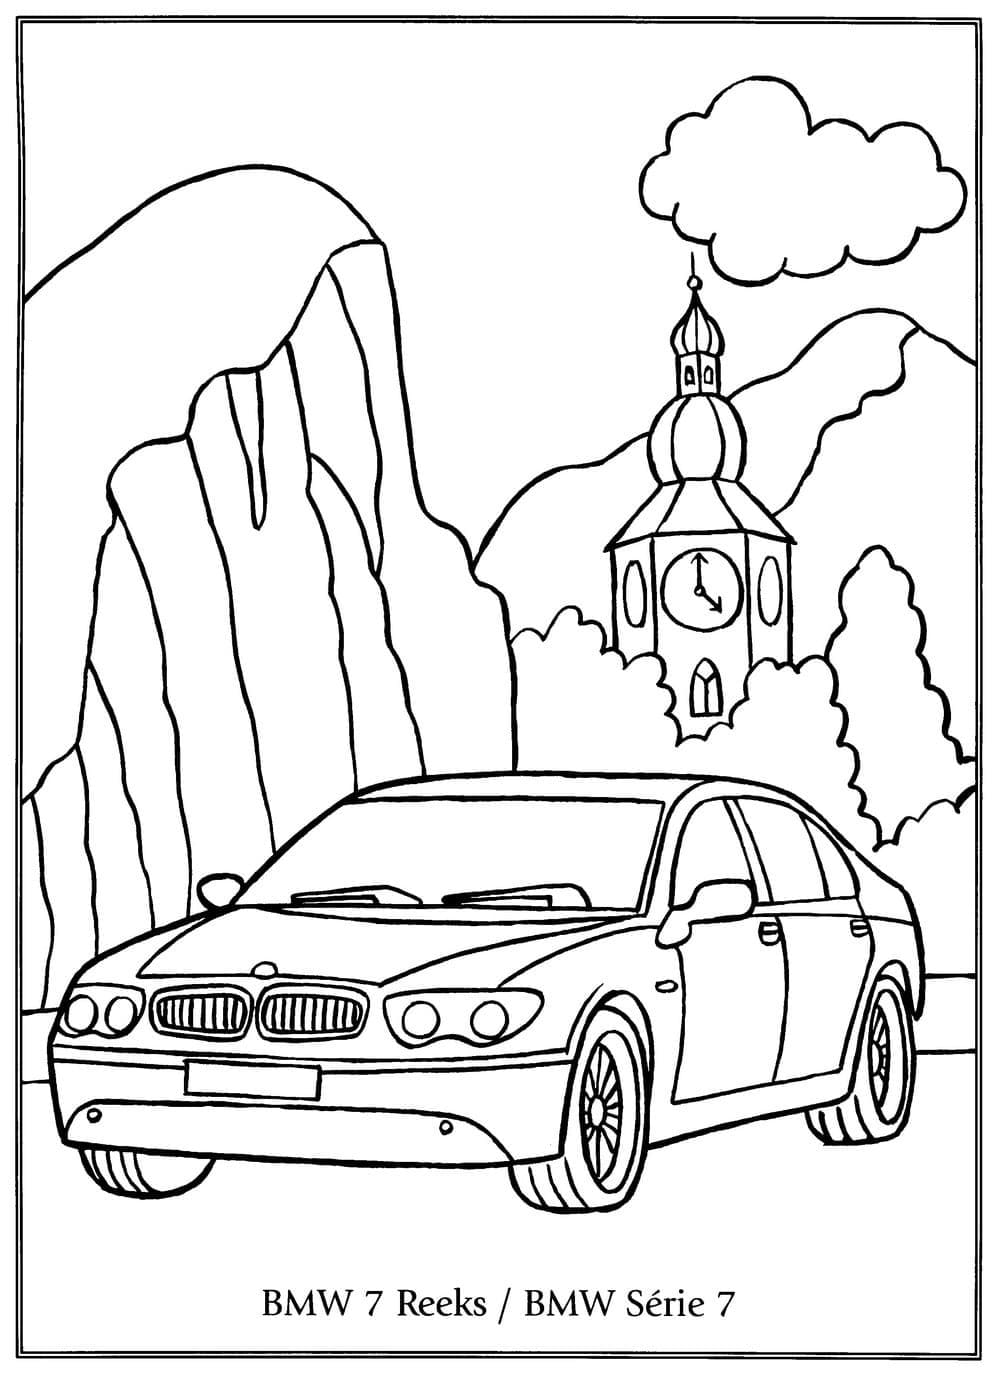 Voiture BMW 7 coloring page